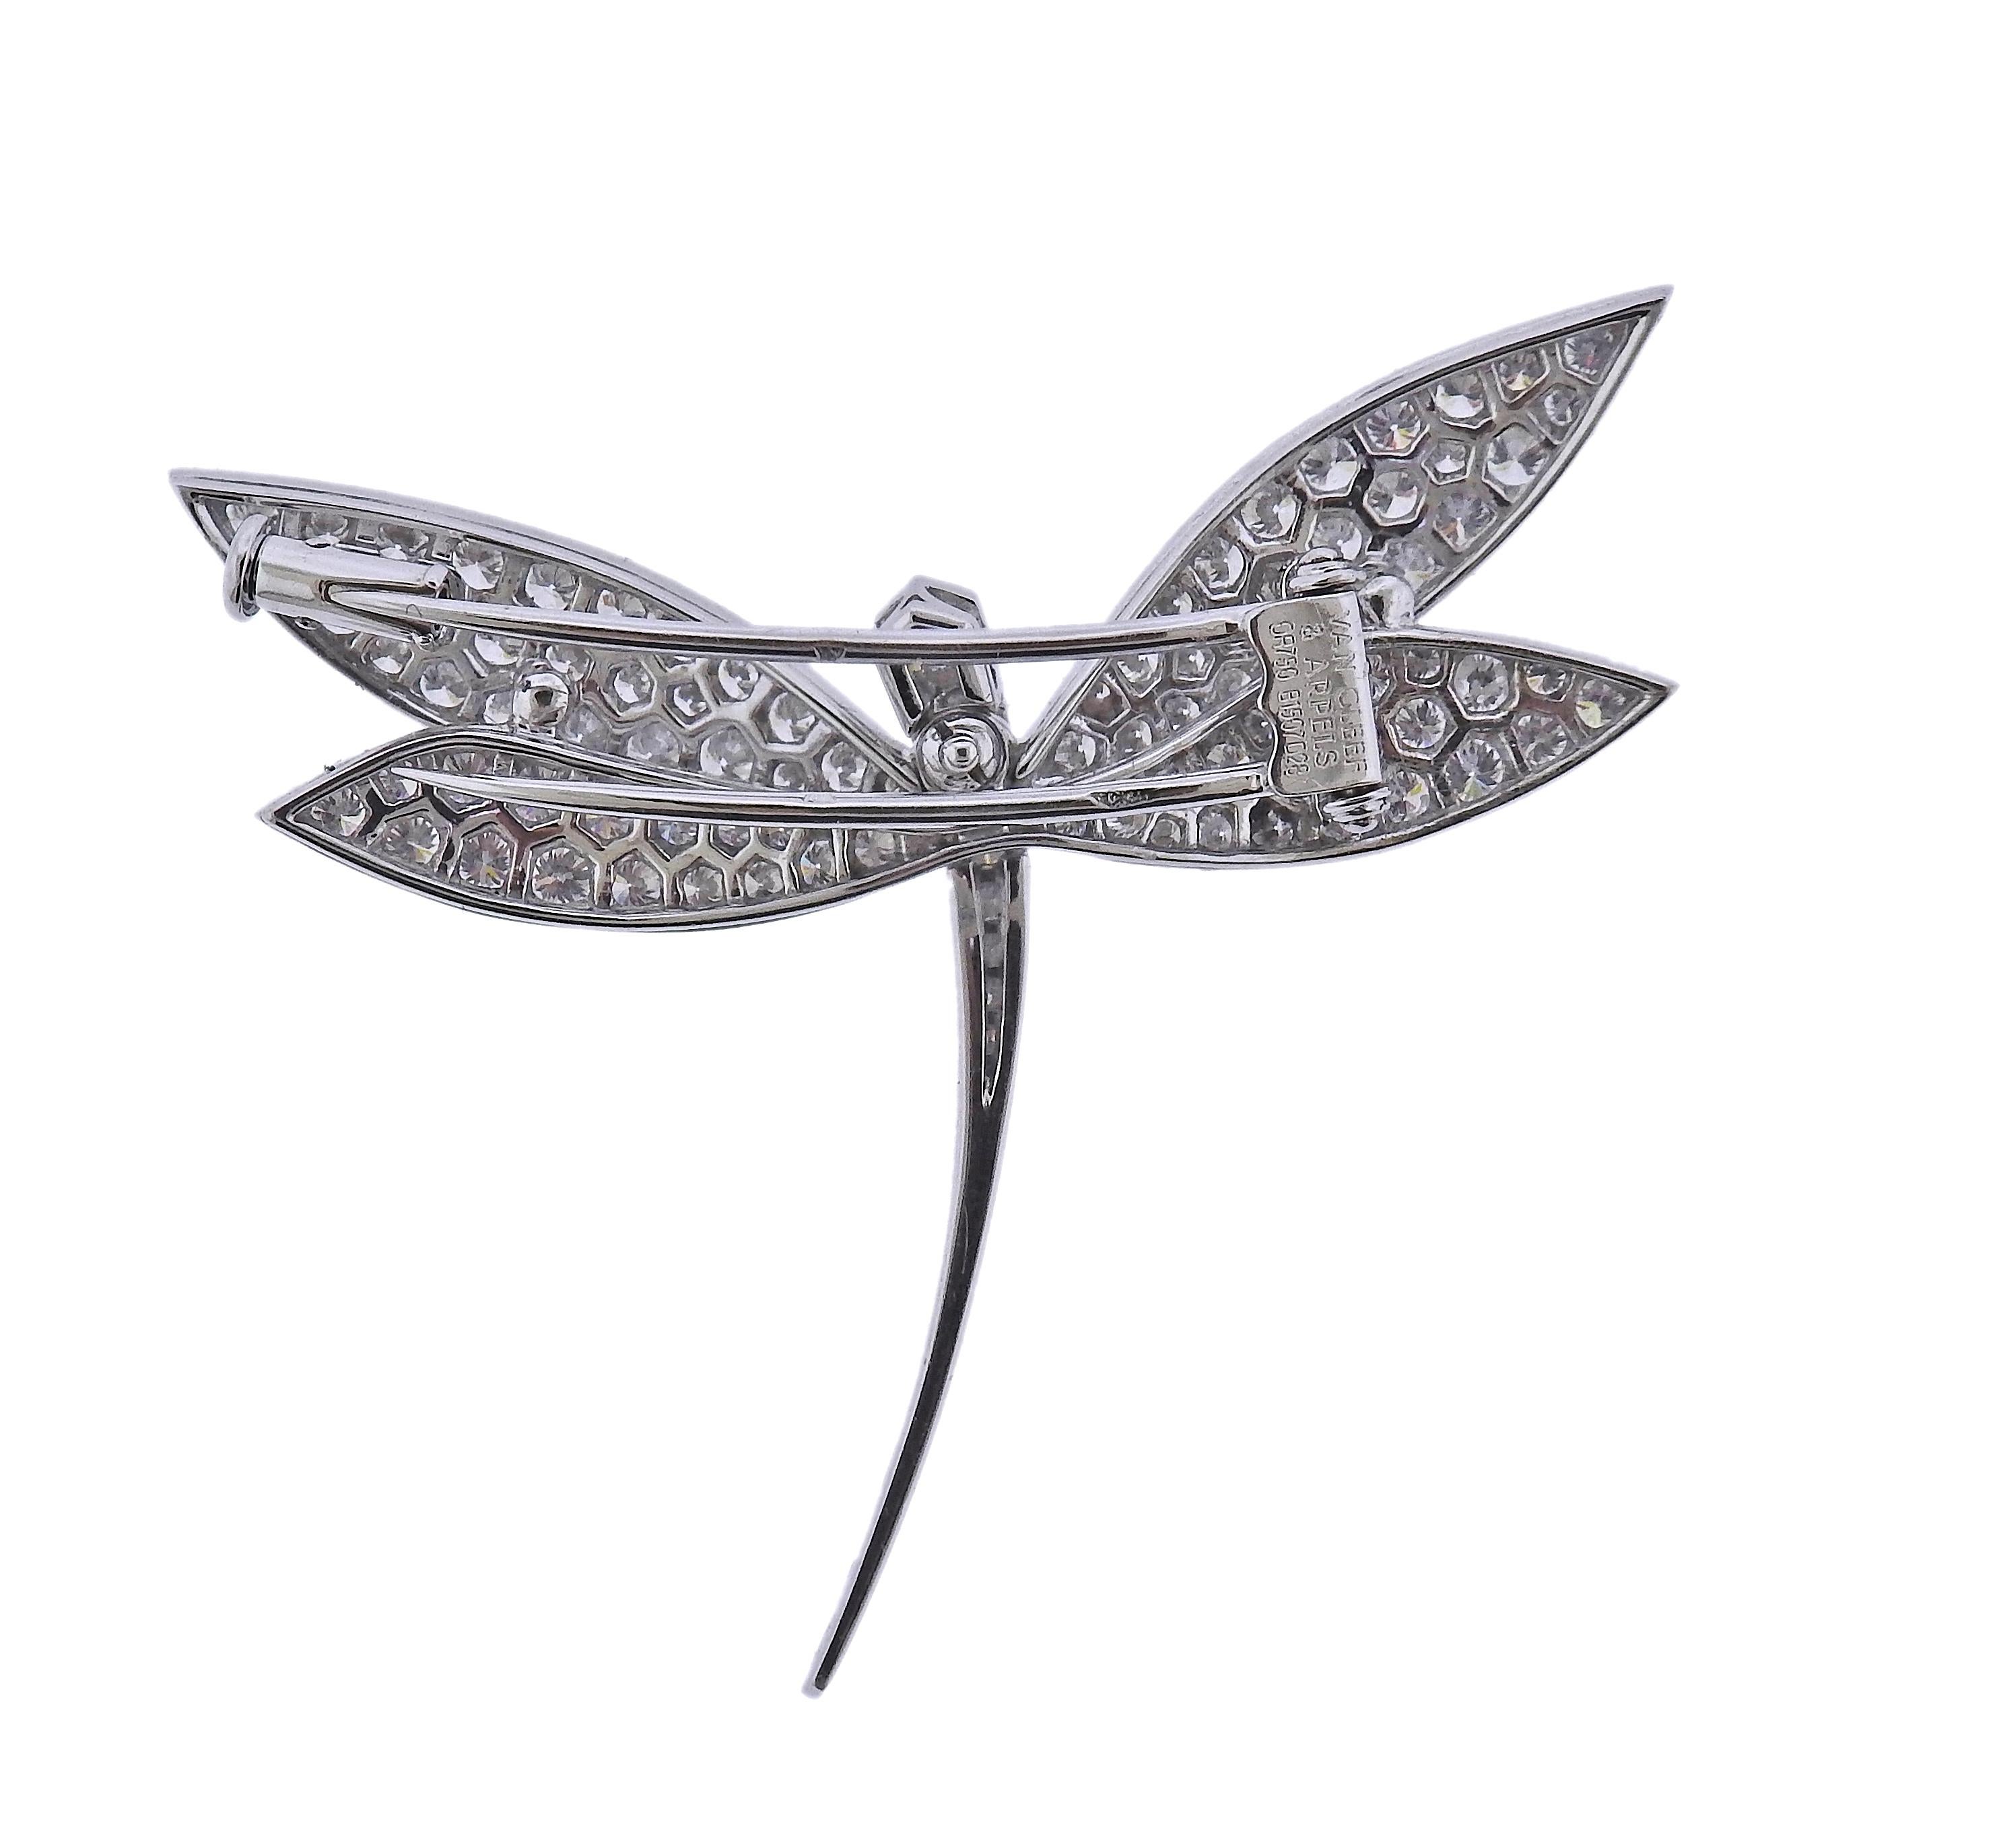 18k white gold dragonfly brooch by Van Cleef & Arpels, with approx. 2.55ctw in diamonds. Brooch measures 45mm x 45mm. Marked: Van Cleef & Arpels, or750, B1507D28. Weight - 8.2 grams. 